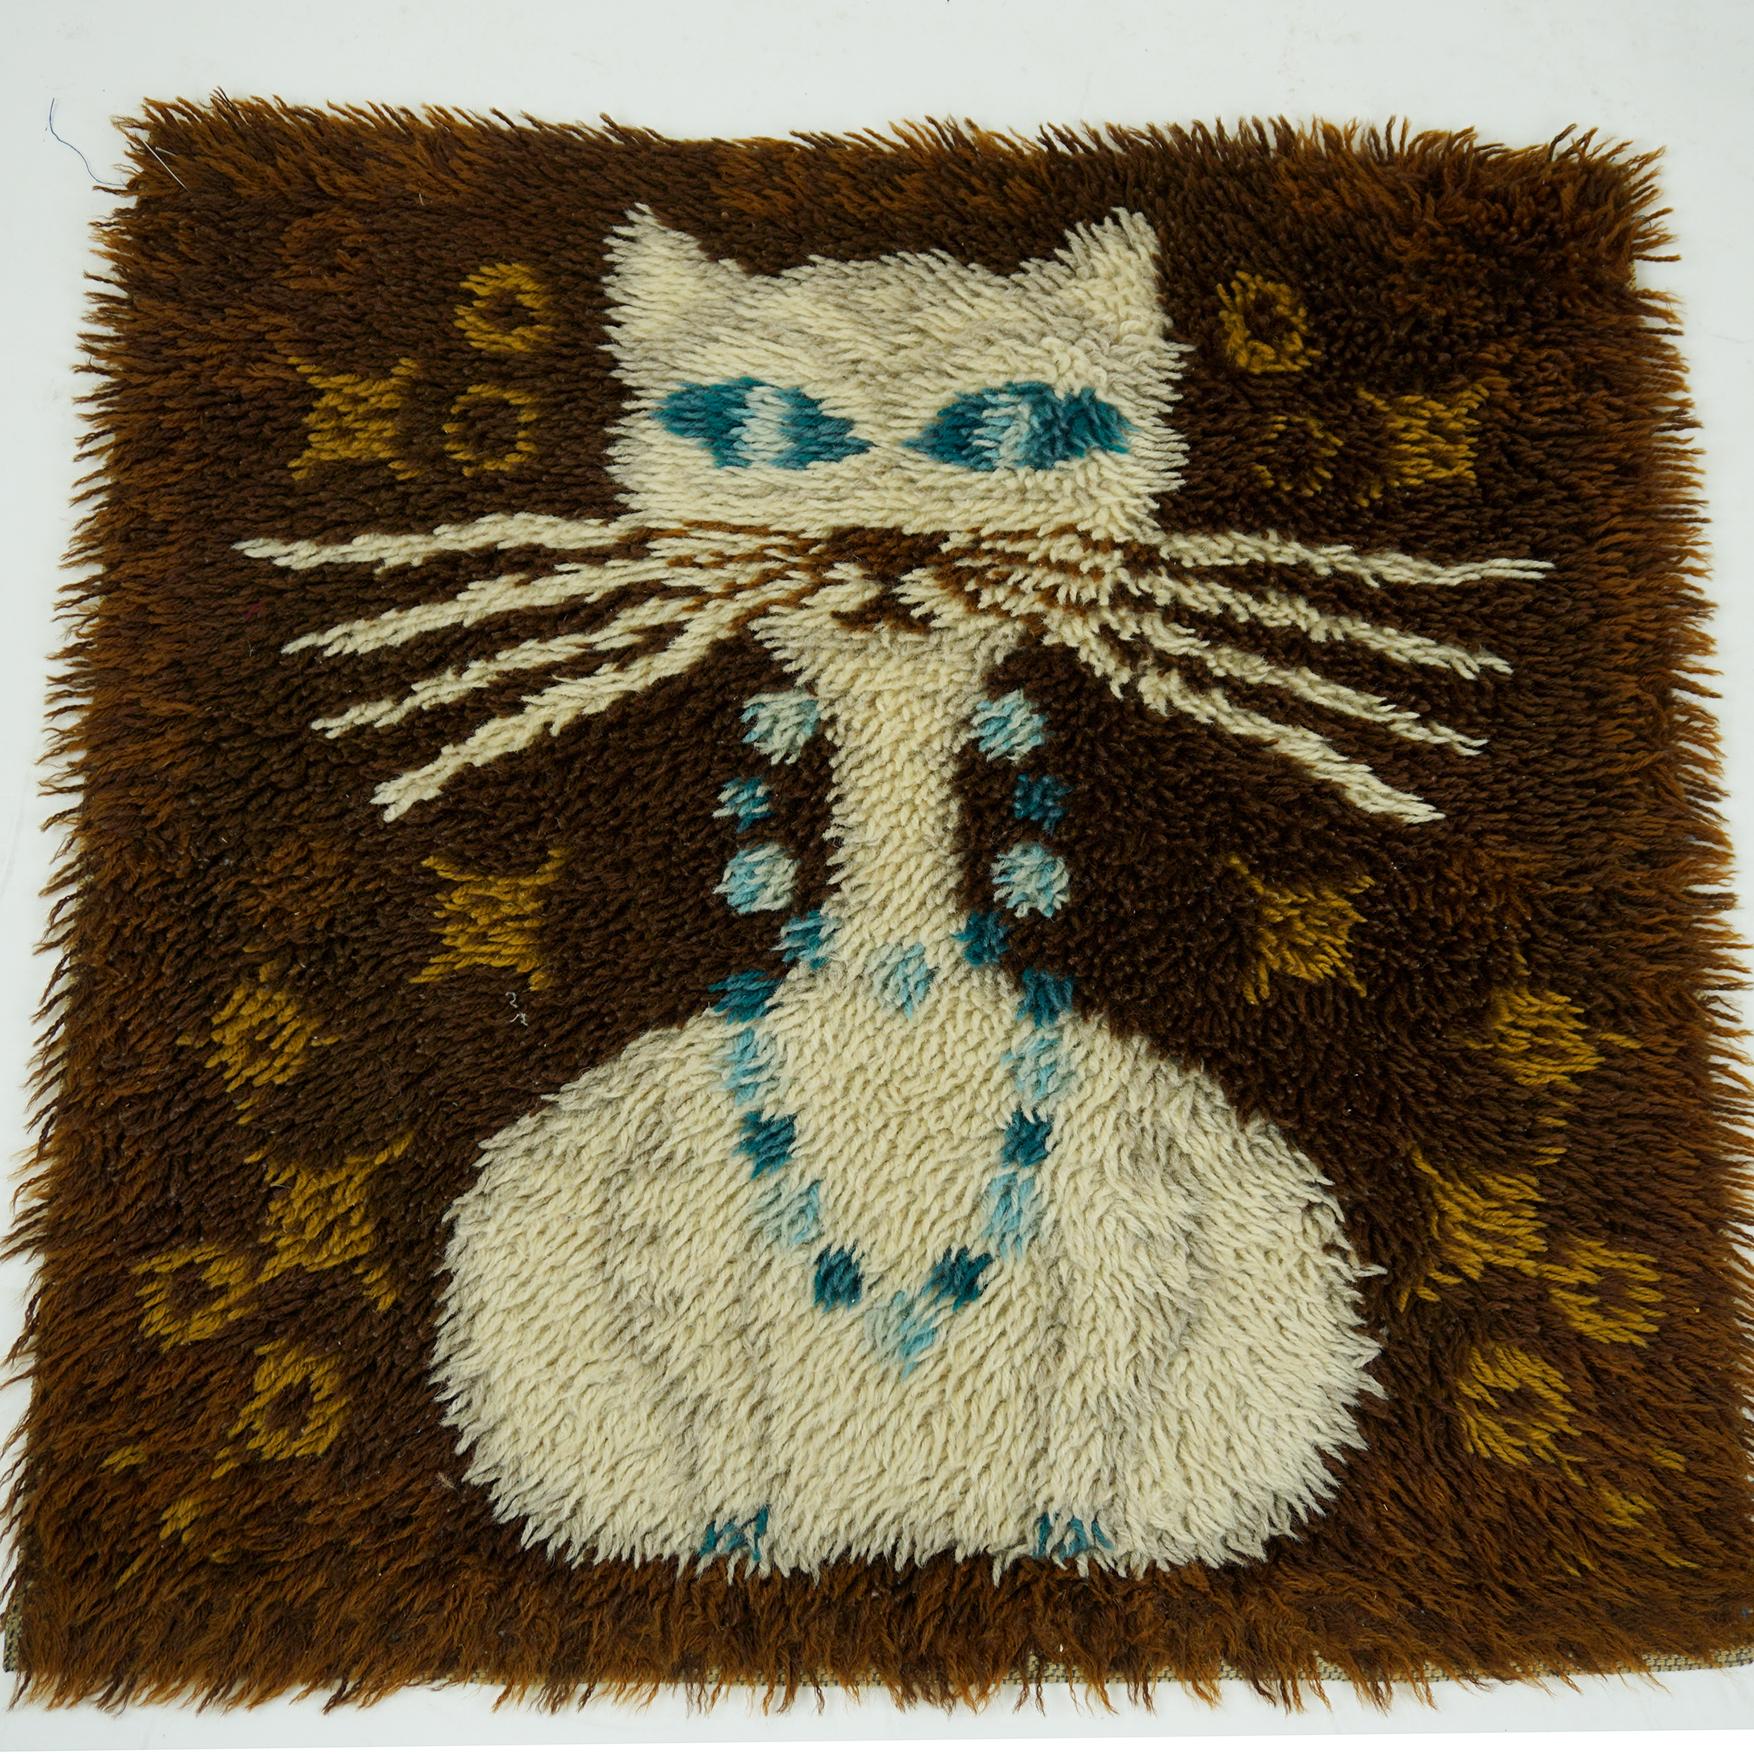 Charming and very decorative design carpet in wonderful shades of brown and blue with a sitting white cat. In beautiful original condition without damages.
It is made from wool in Denmark 1960s and can be used on the floor or as well as a wall